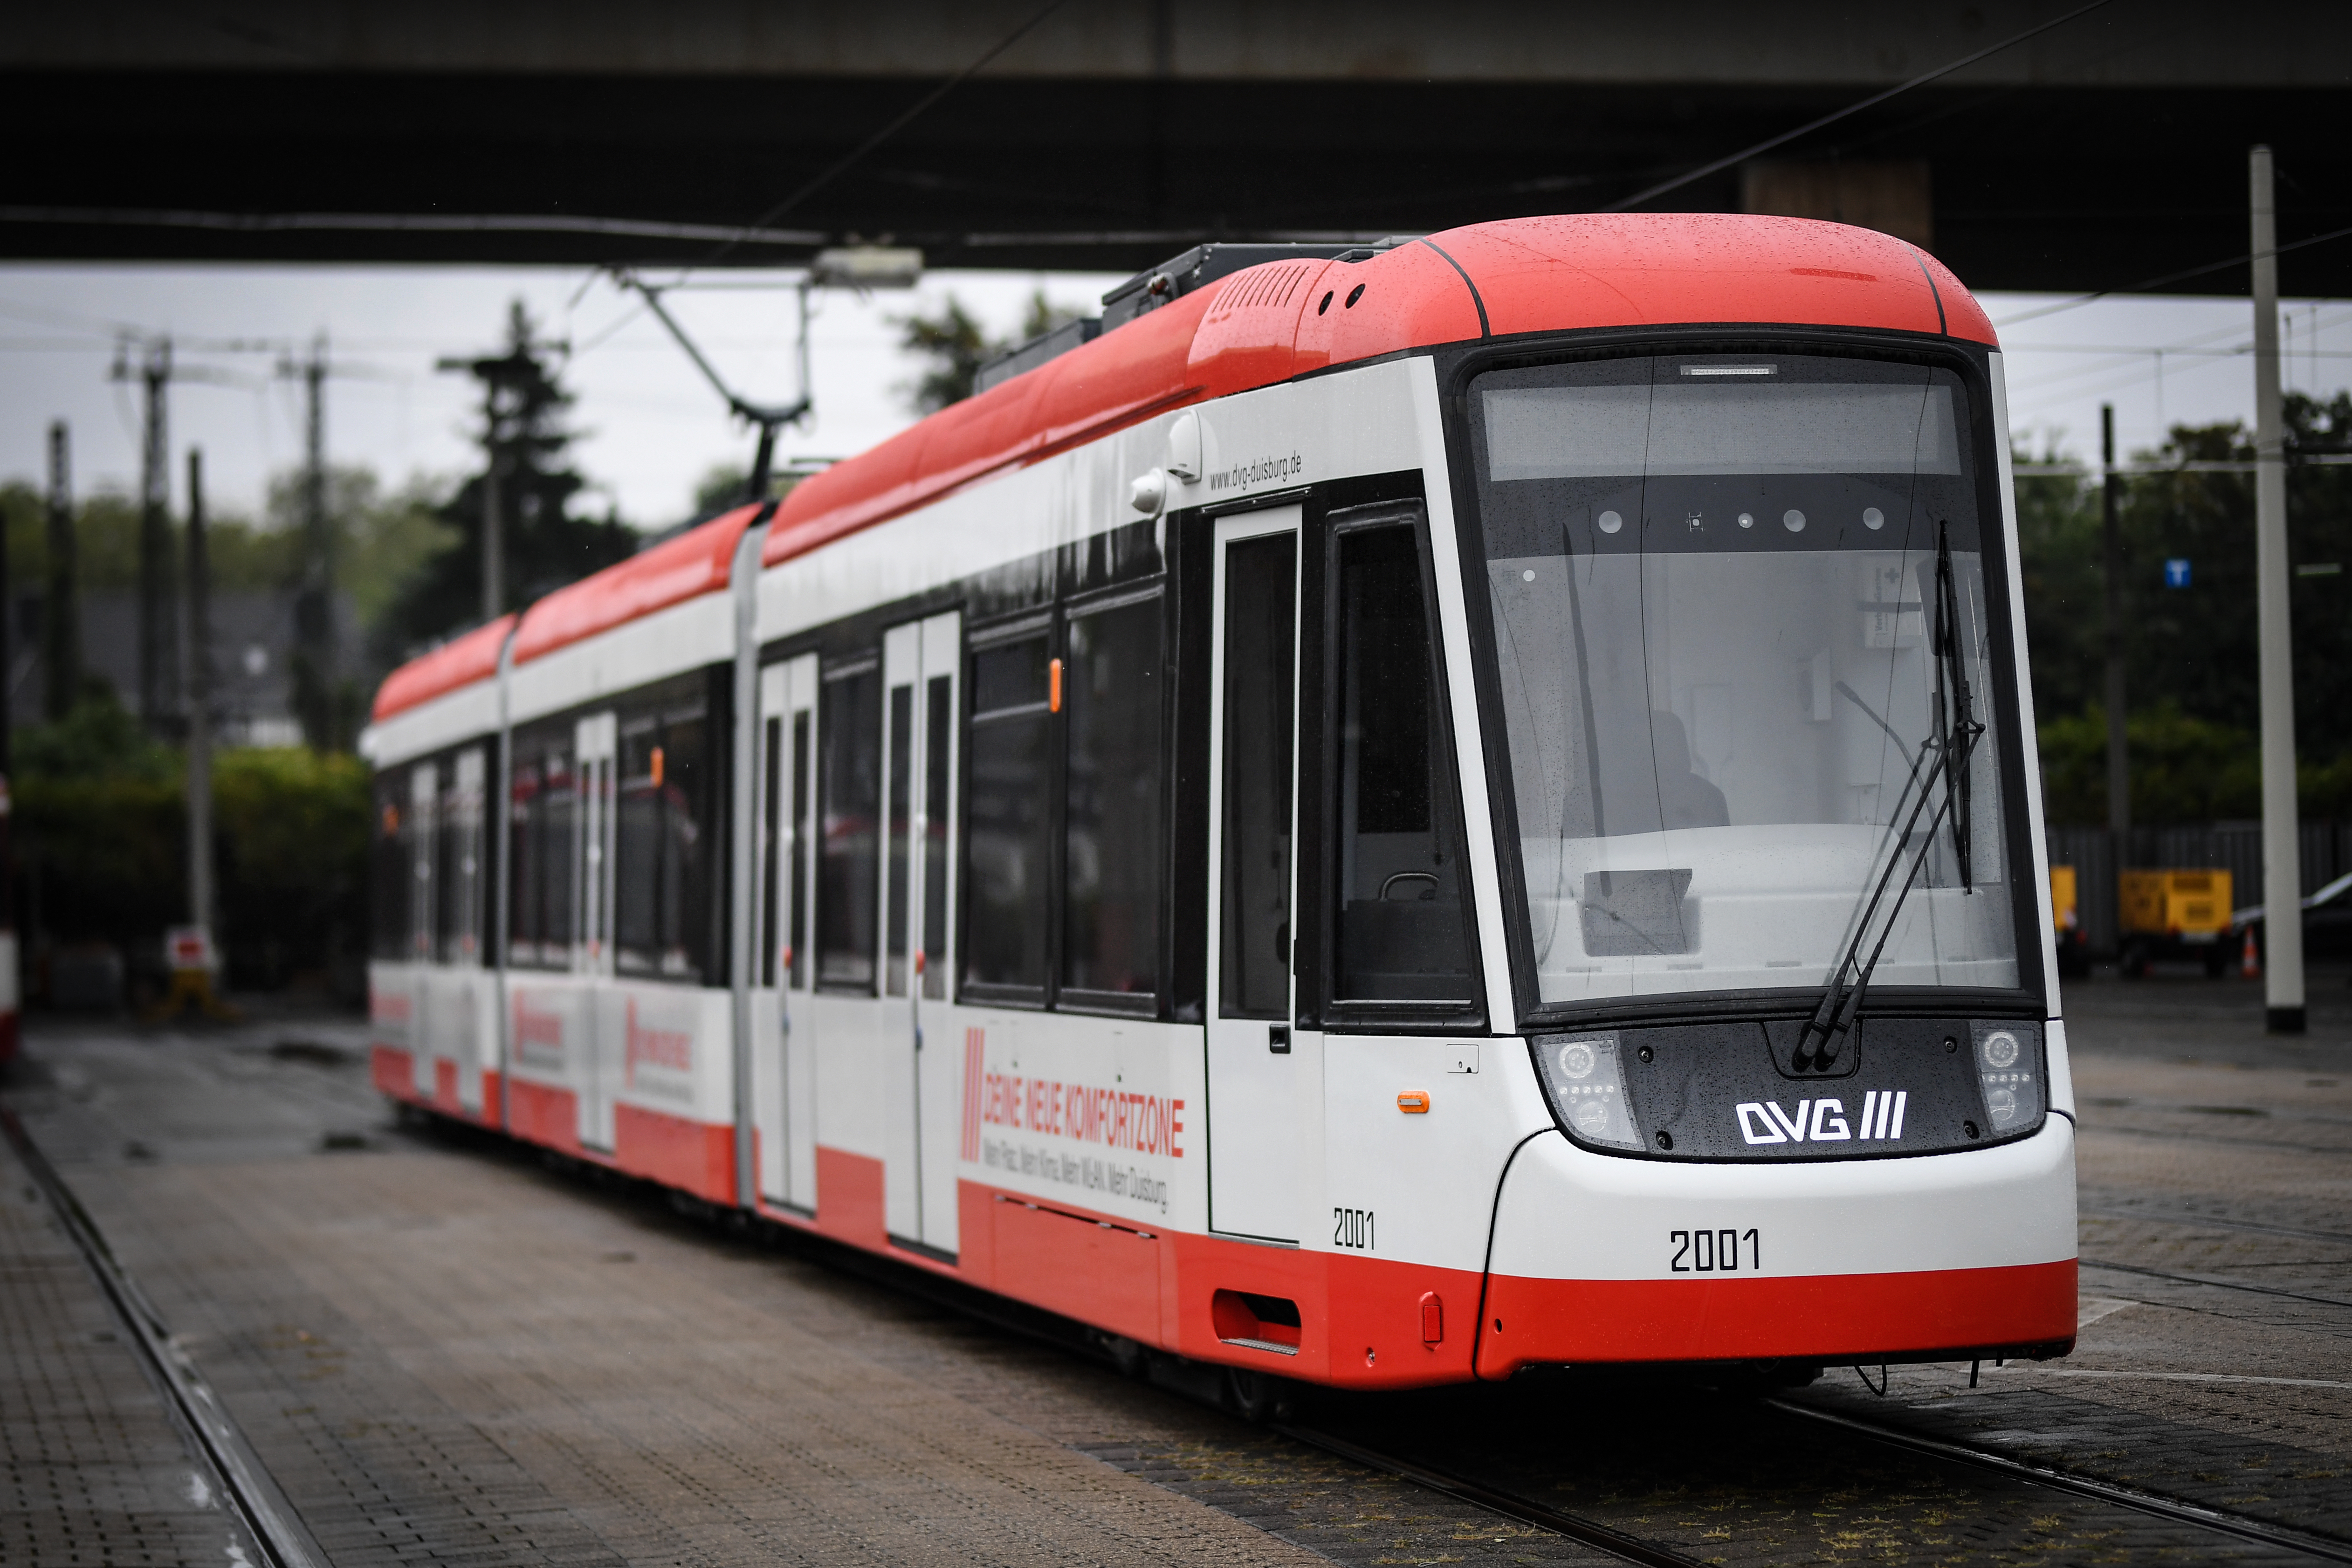 New FLEXITY tram equipped with the ODAS system to prevent collisions_Copyrigt DVG